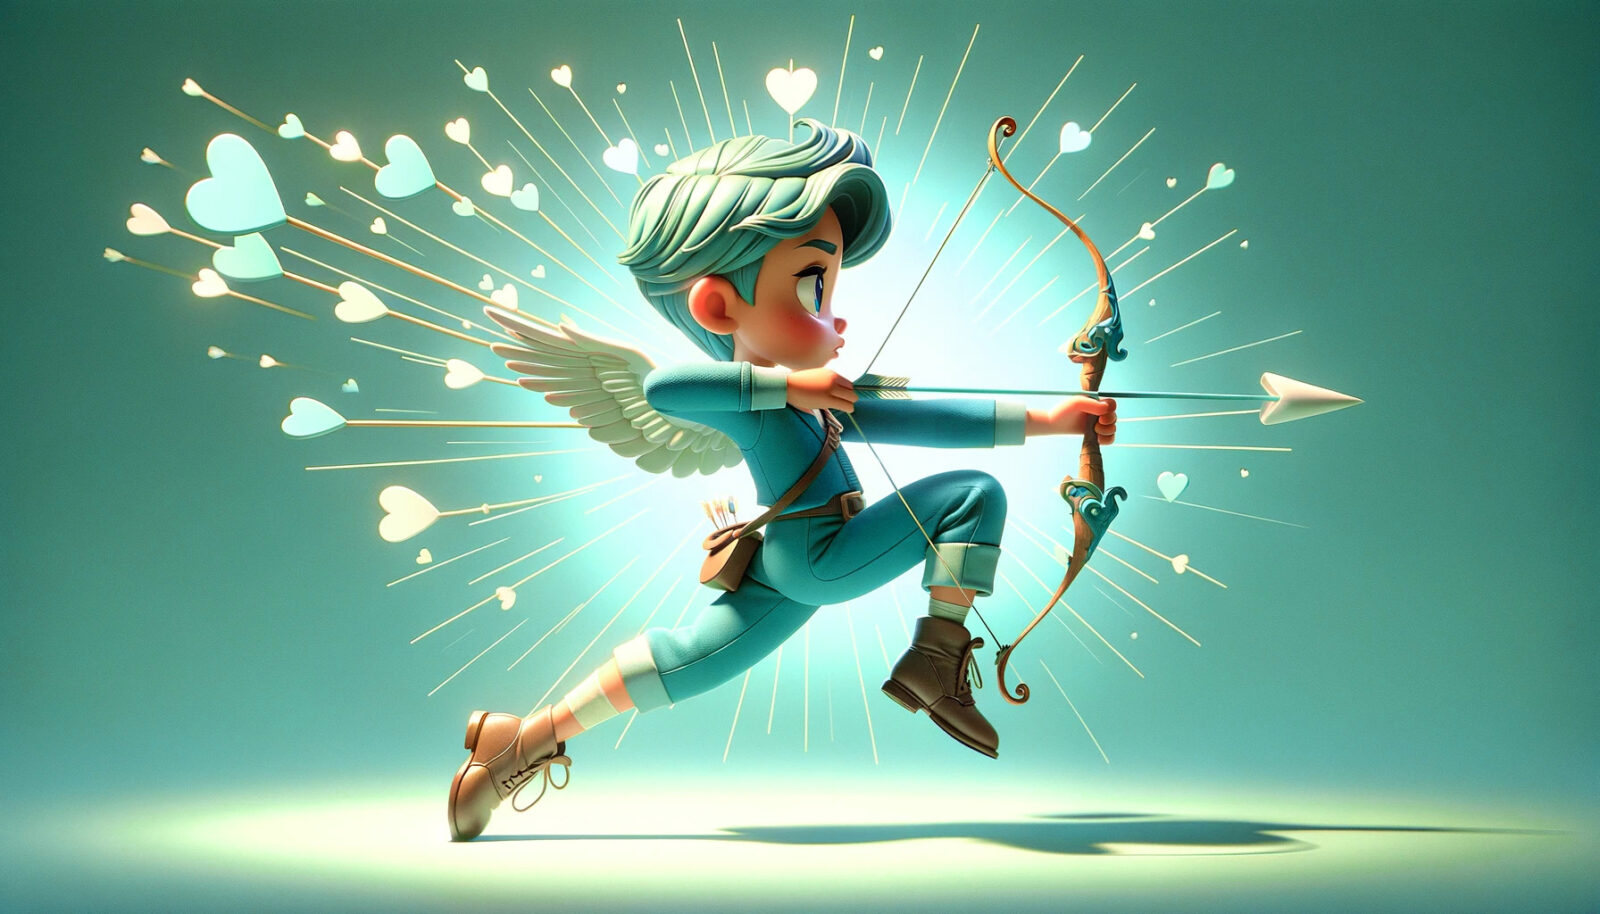 A cupid pulling back a bowstring to shoot an arrow of love.